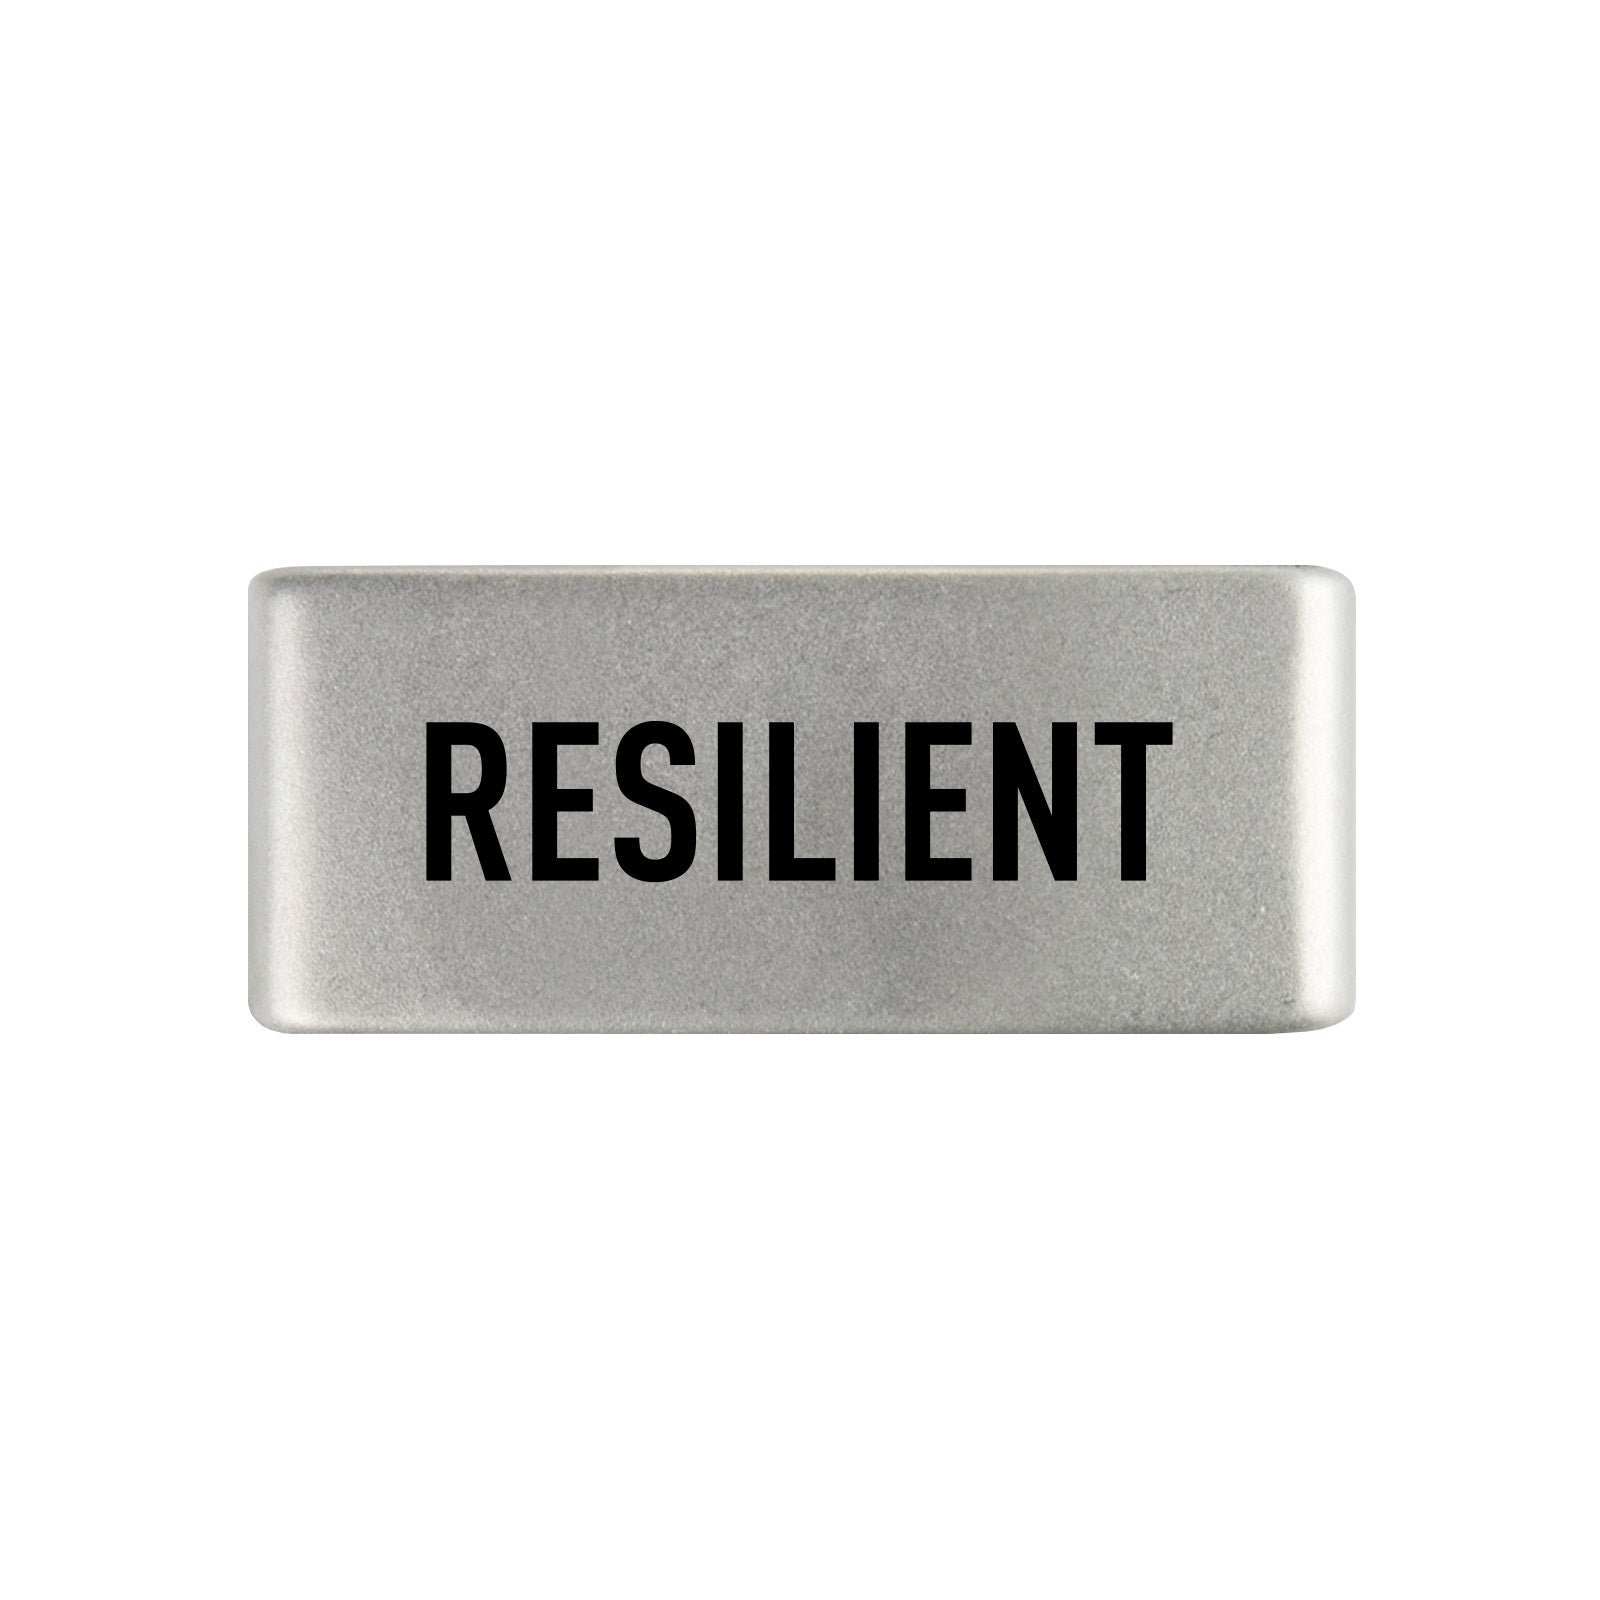 Resilient Badge Badge 13mm - ROAD iD